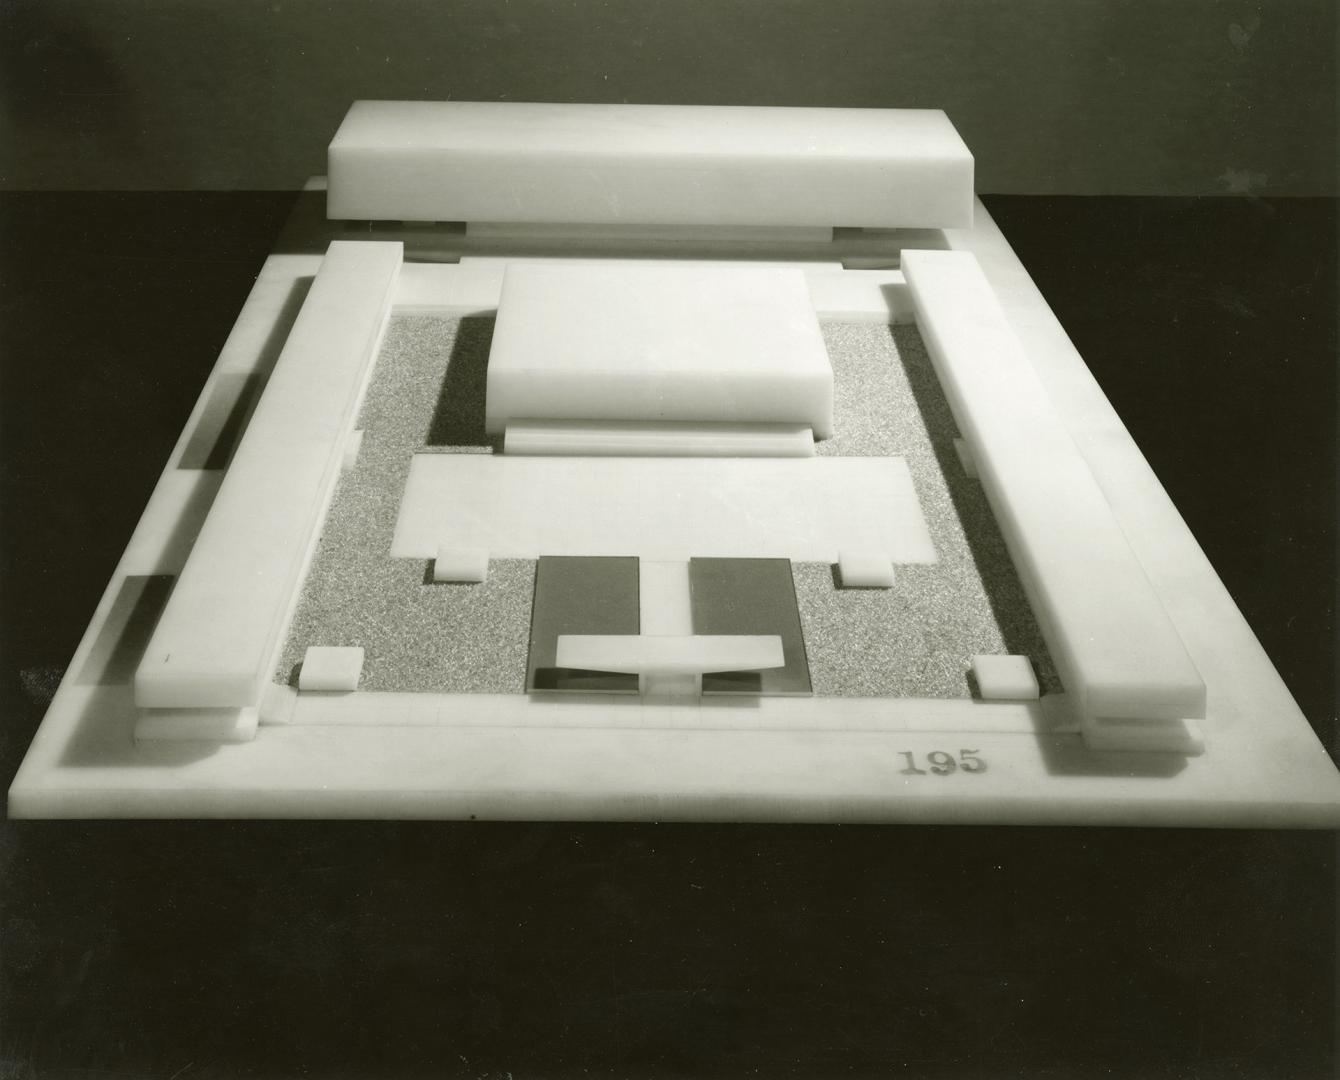 Pafford Keatinge-Clay entry, City Hall and Square Competition, Toronto, 1958, architectural model